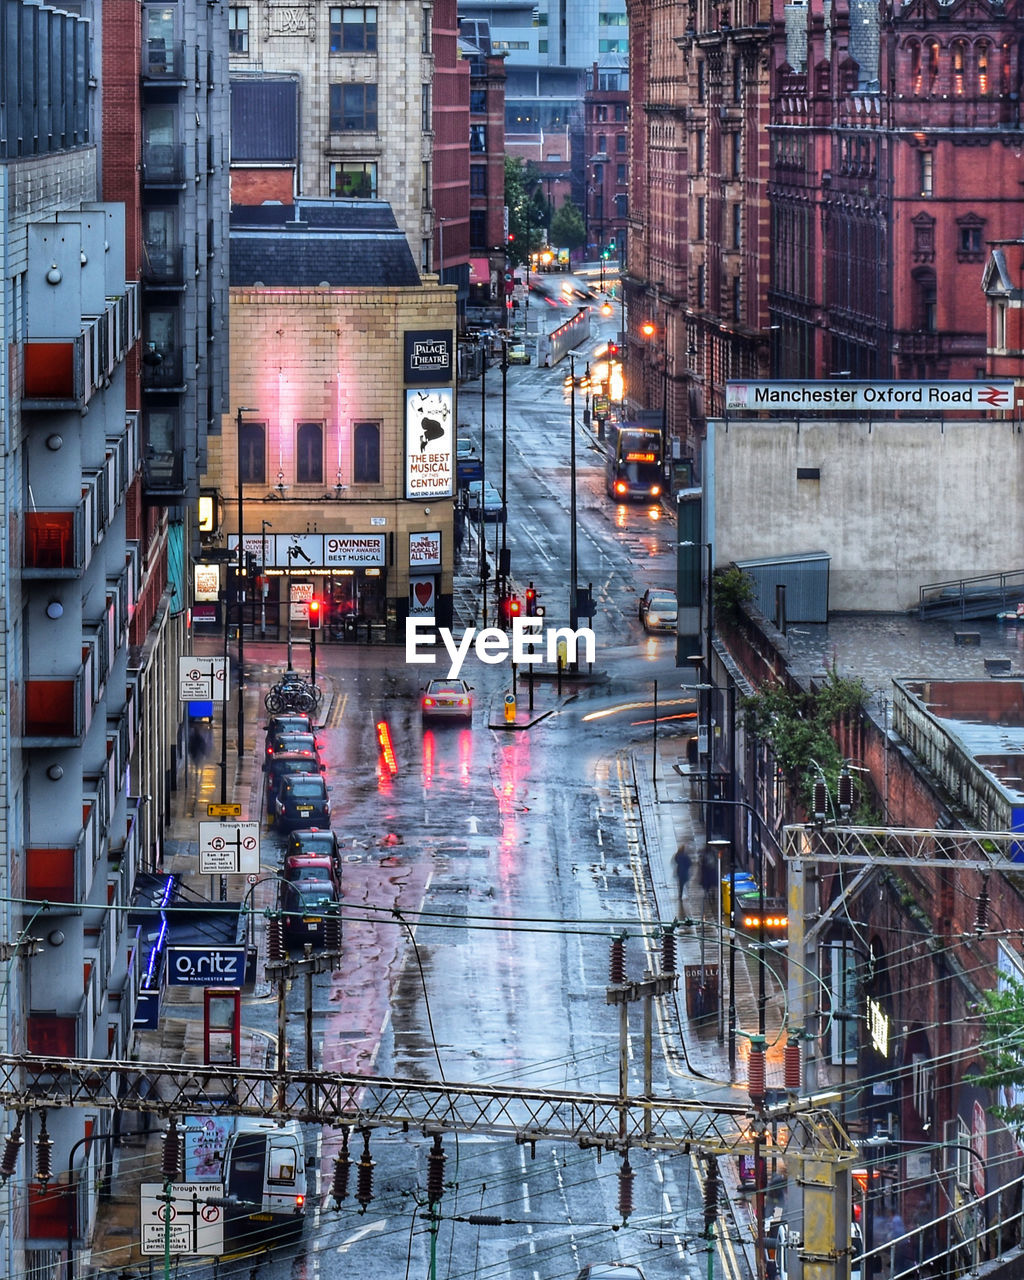 View of city street and buildings during rainy season